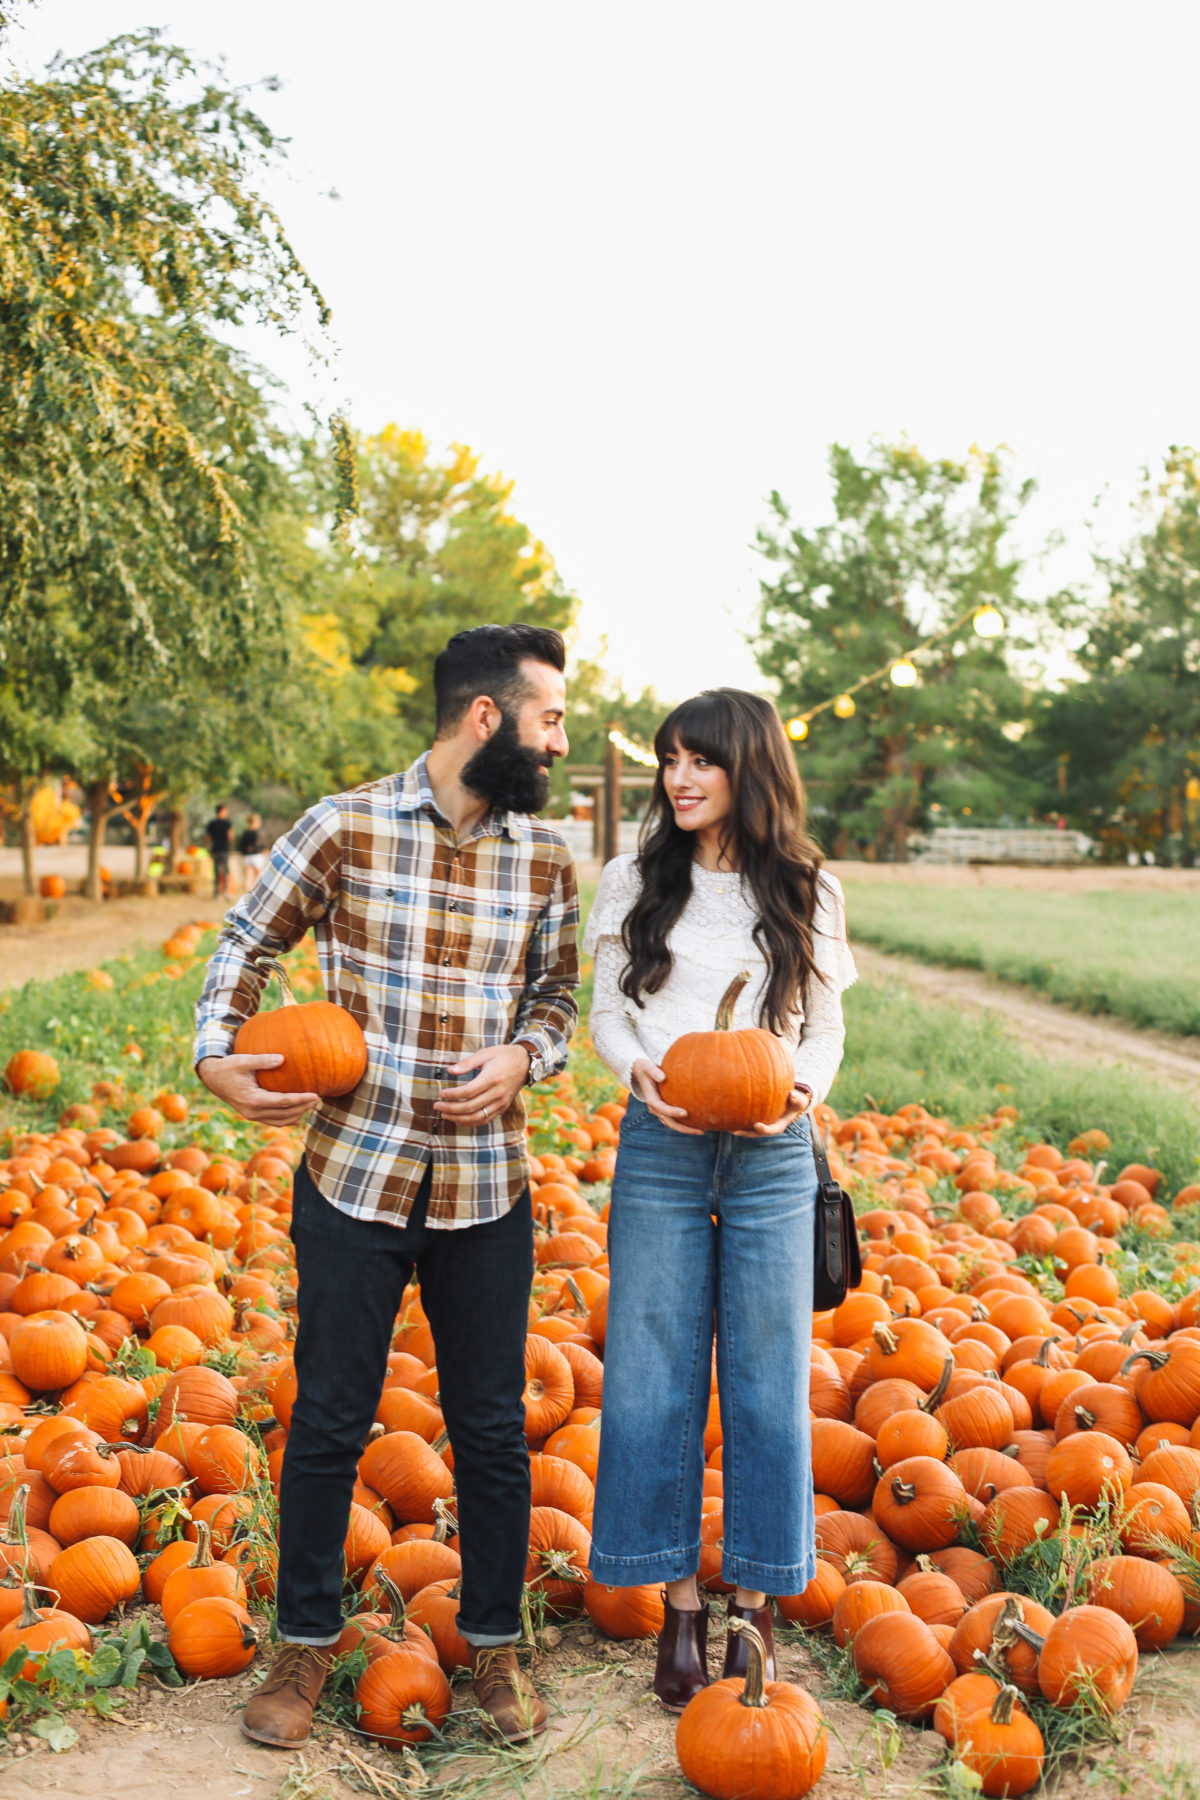 Fall Traditions: Our Annual Pumpkin Picking